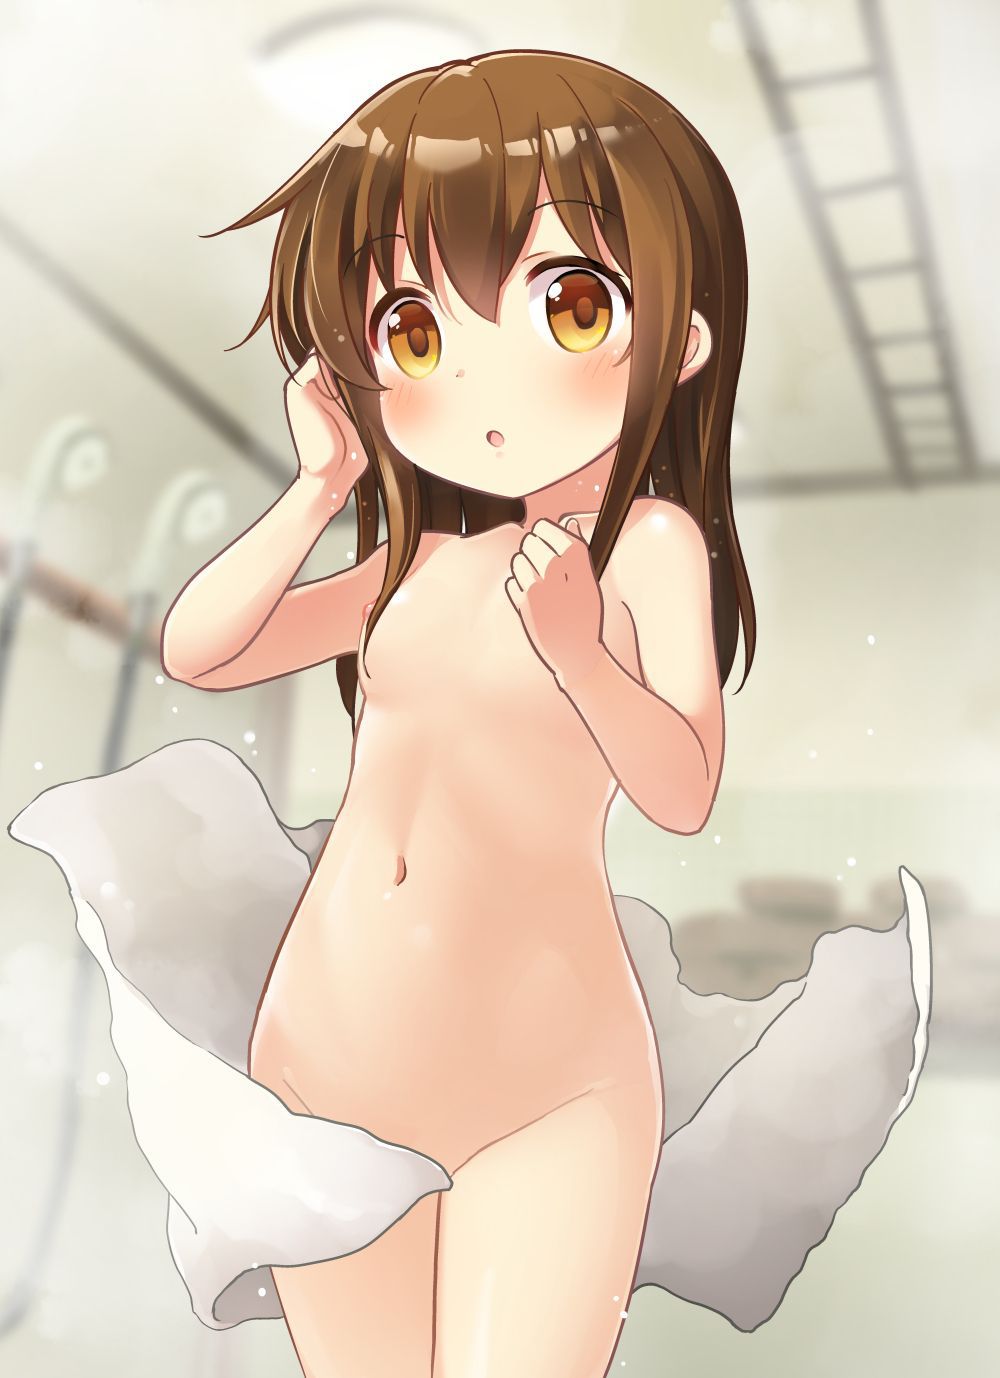 A cute two-dimensional erotic image of a poor milk loli girl for ladies and gentlemen who likes to be a little 27